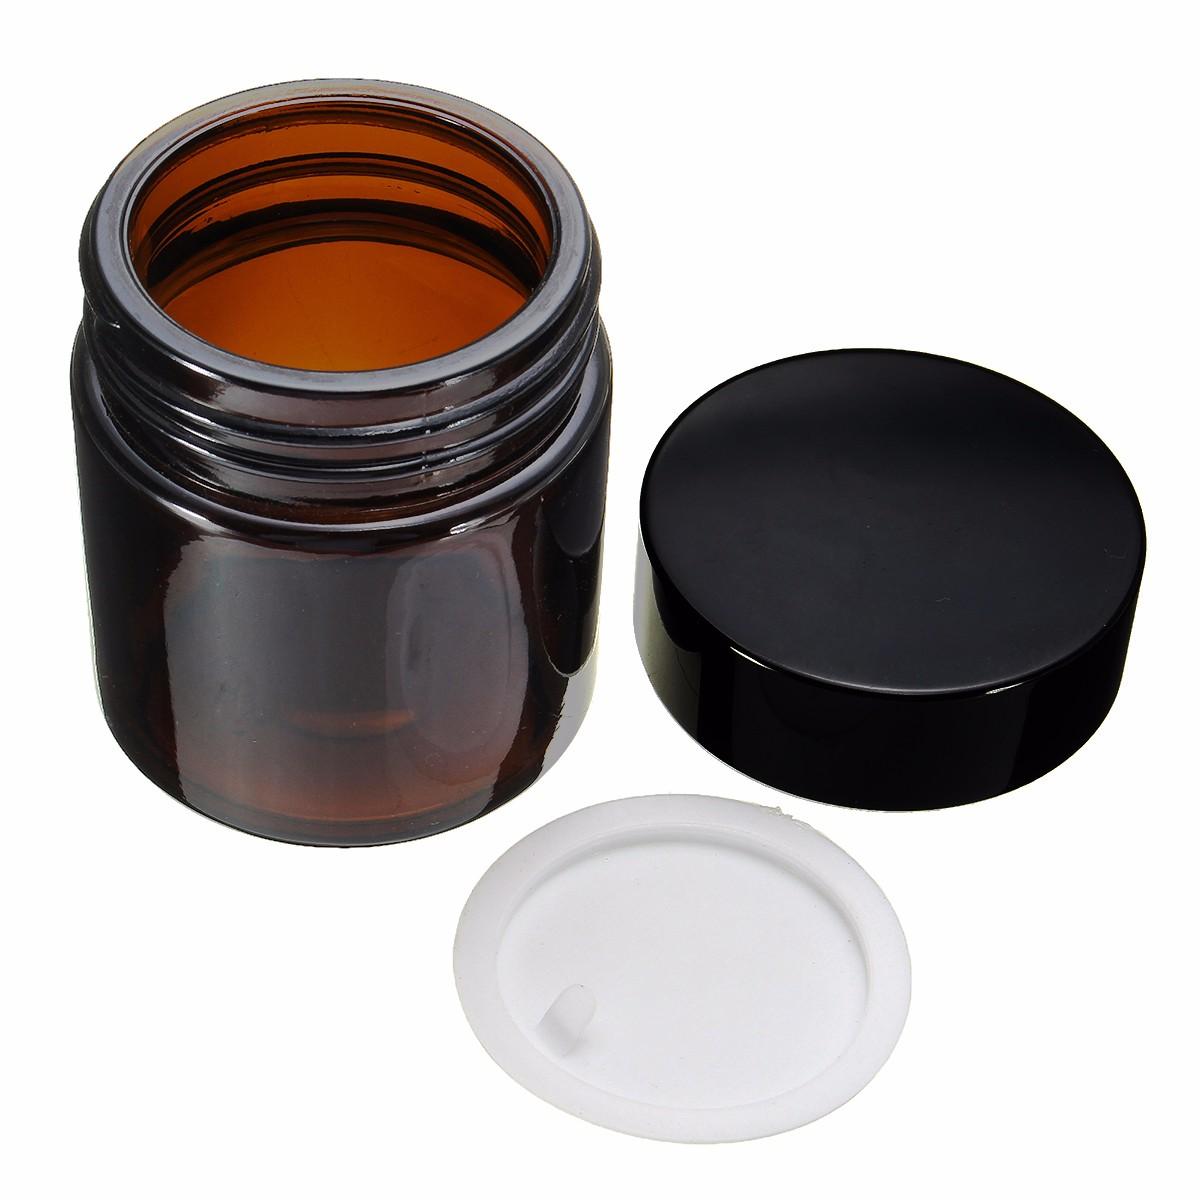 

120ml Amber Glass Jar Bottles With Black Lid For DIY Cosmetics Candles Spices